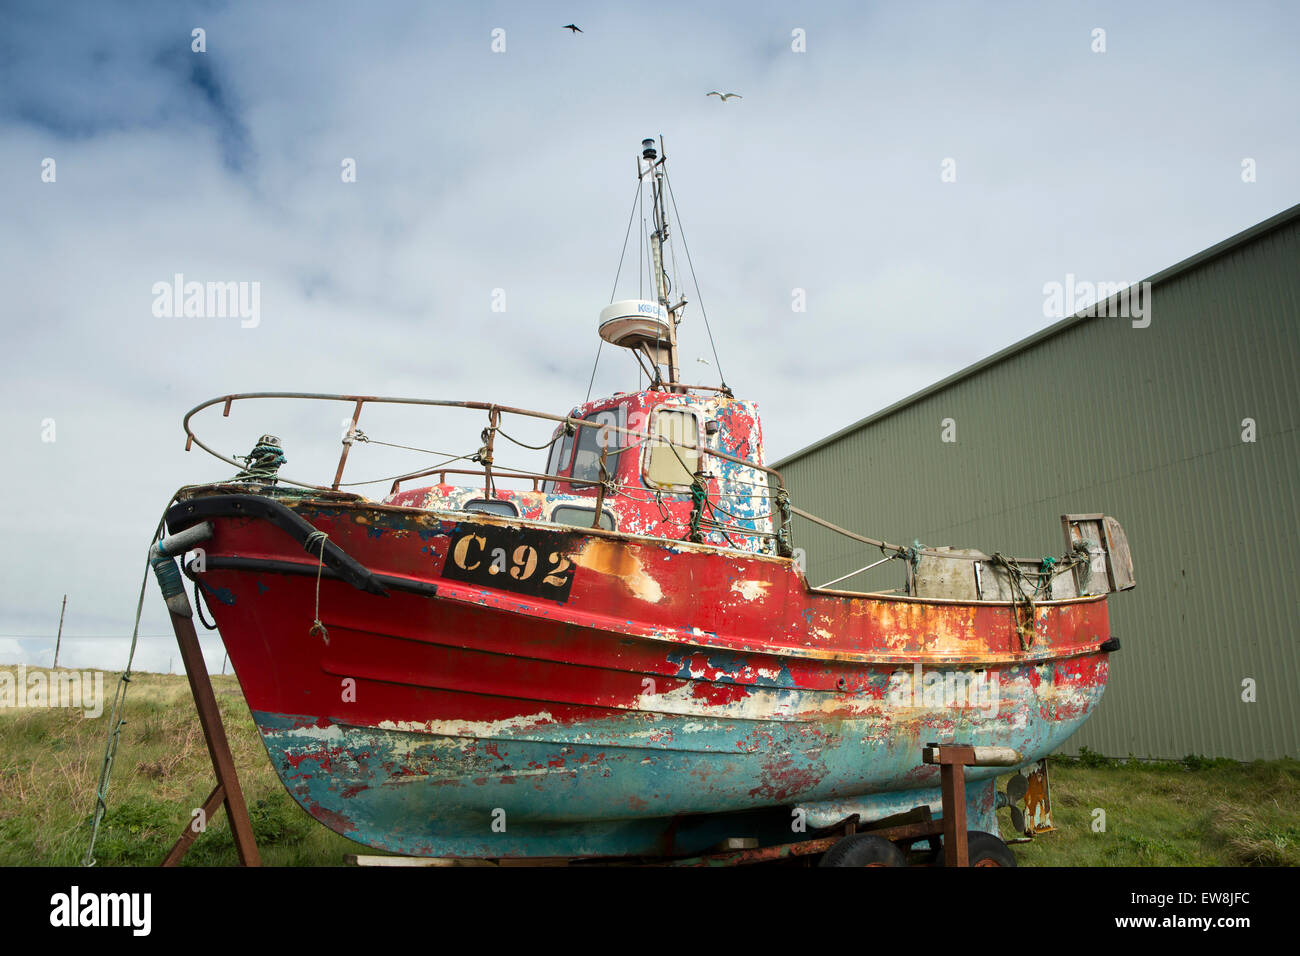 Ireland, Co Wexford, Kilmore Quay, colourful old fishing boat above the beach Stock Photo